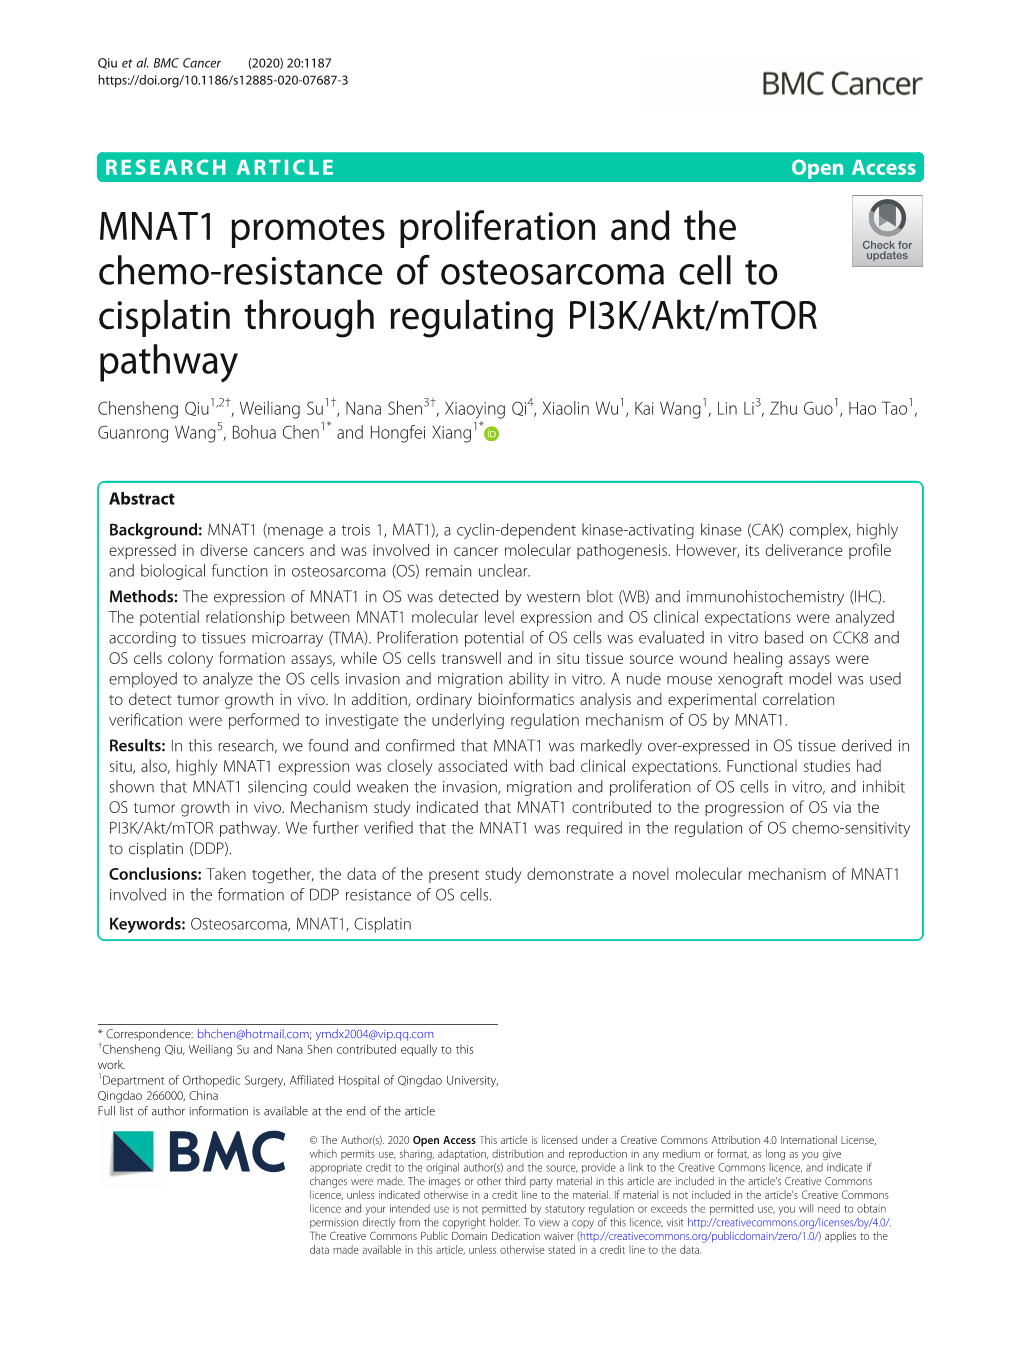 MNAT1 Promotes Proliferation and the Chemo-Resistance of Osteosarcoma Cell to Cisplatin Through Regulating PI3K/Akt/Mtor Pathway